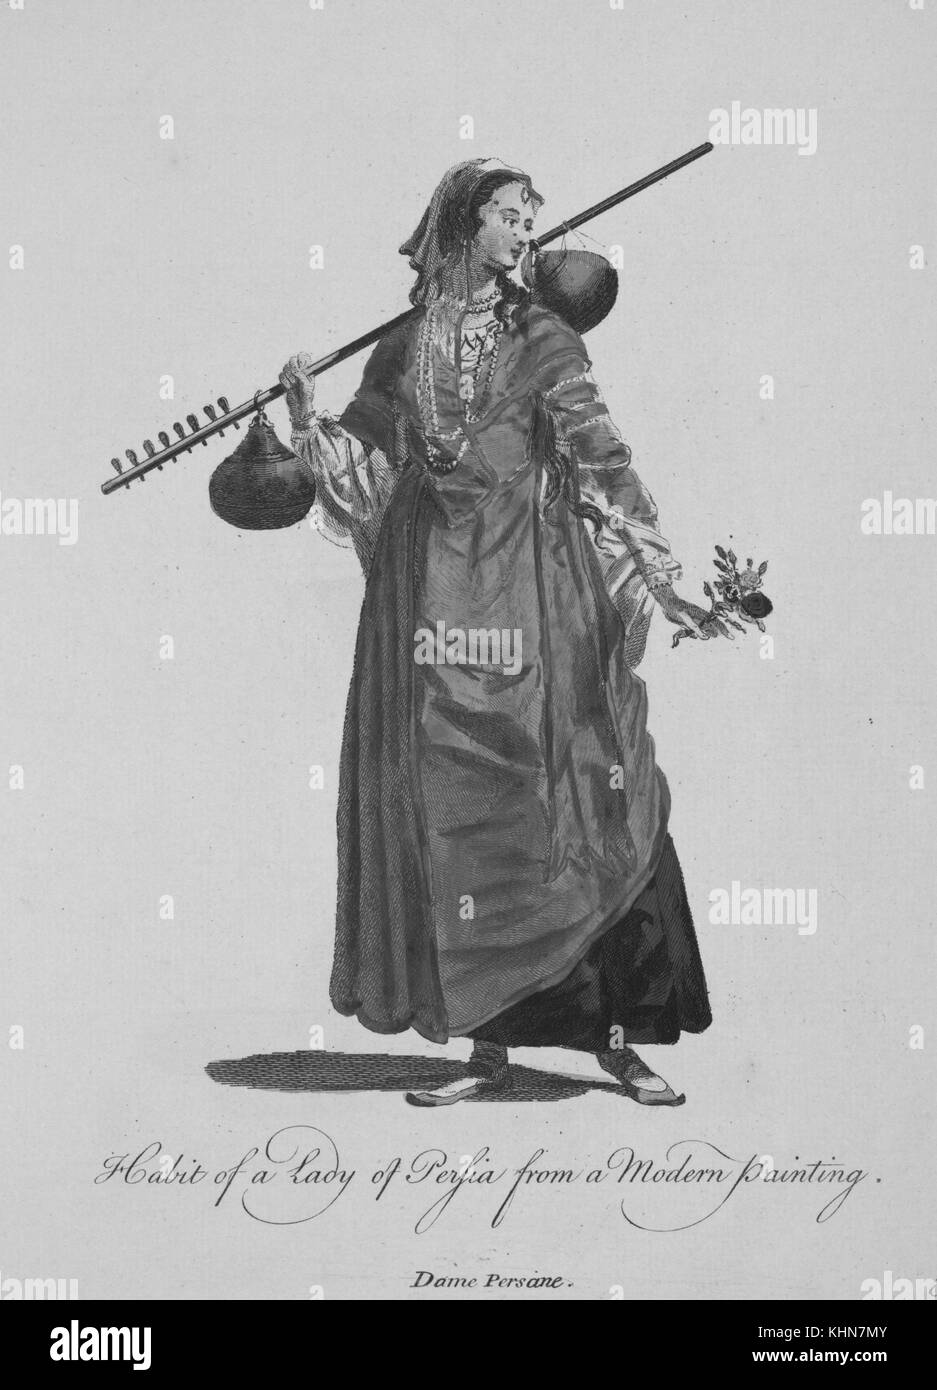 Habit of a lady of Persia from a modern painting, Dame Persiane, 1764. From the New York Public Library. Stock Photo